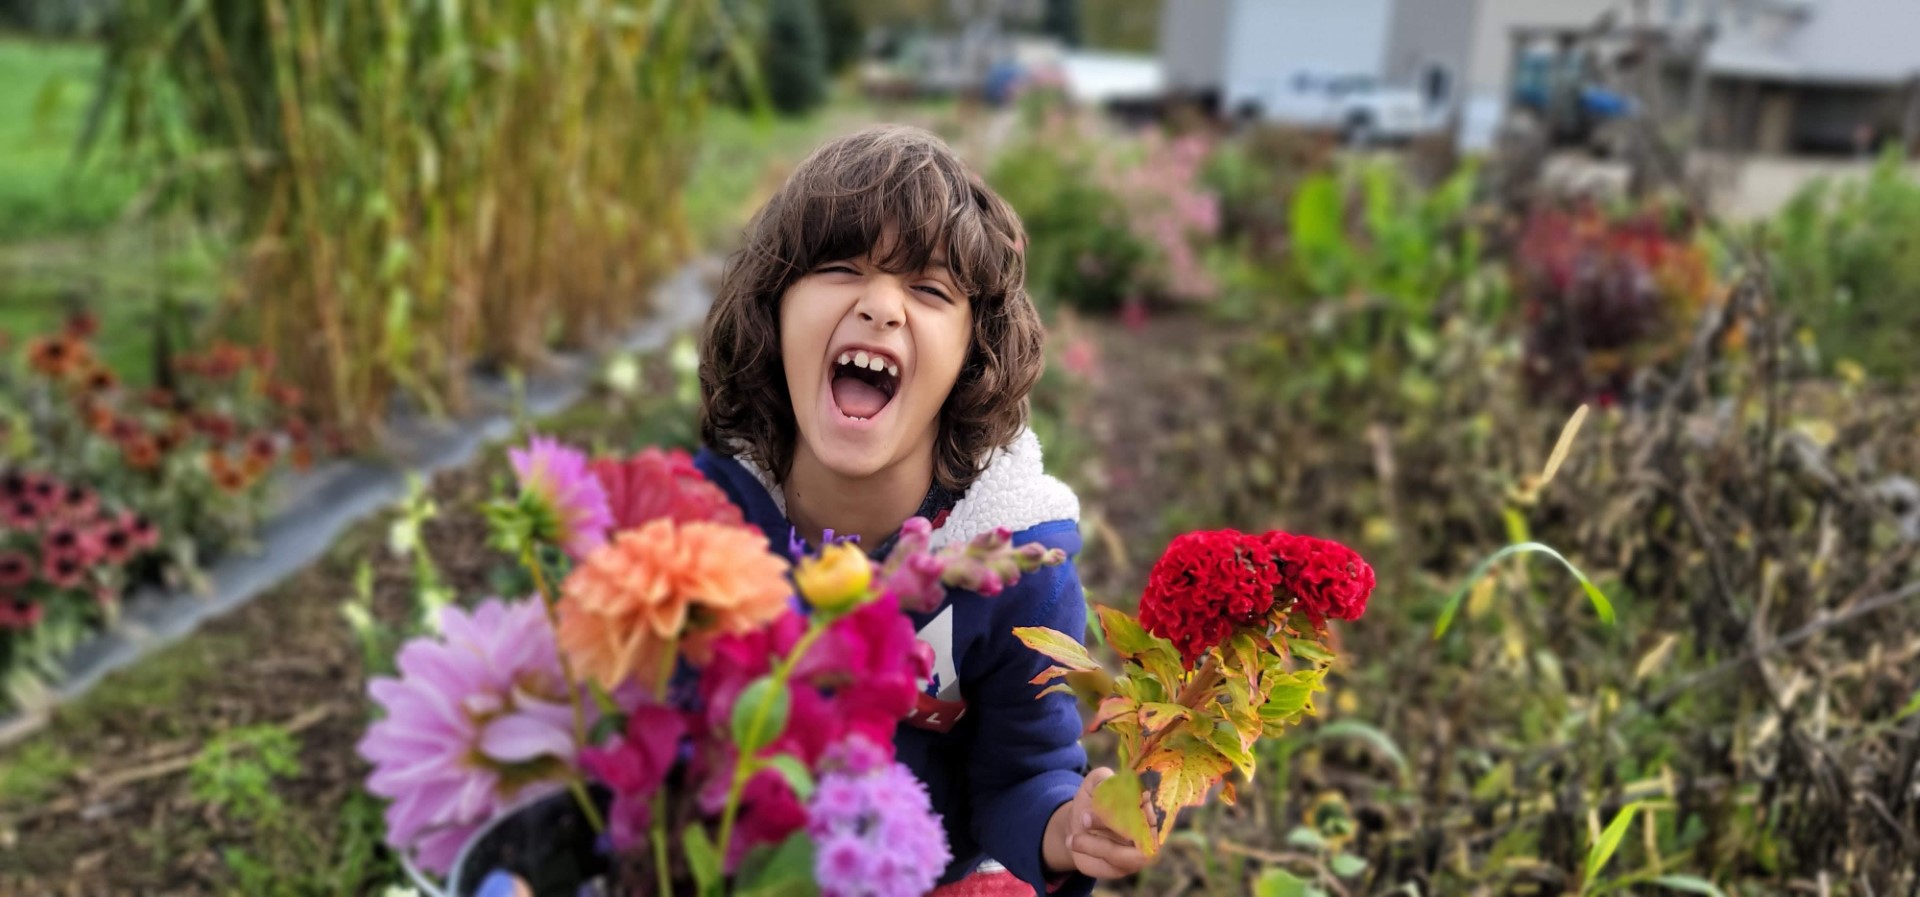 kid smiling at flower bouquet